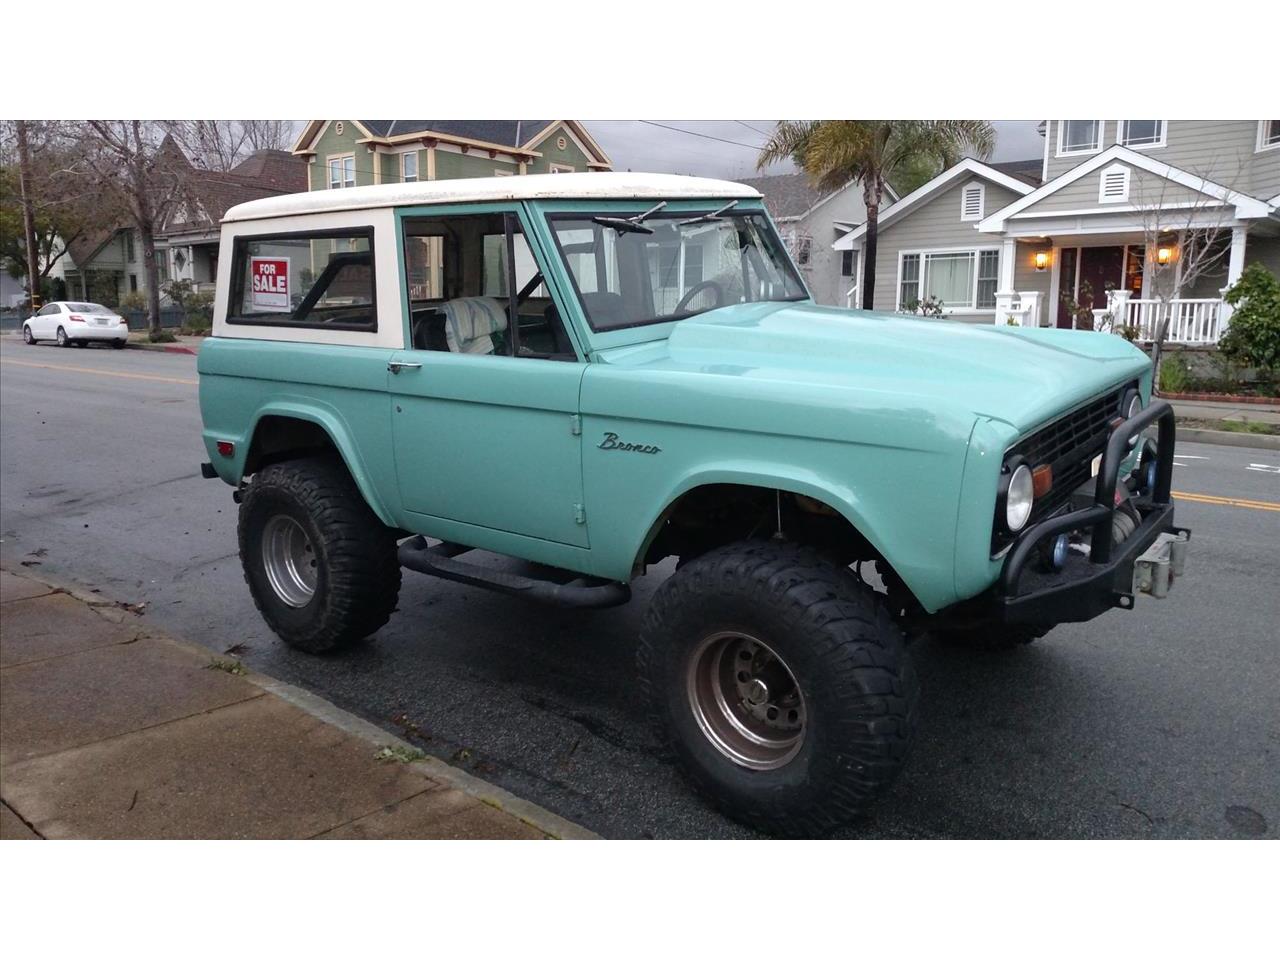 1969 ford bronco for sale classiccars com cc 914971 1969 ford bronco for sale classiccars